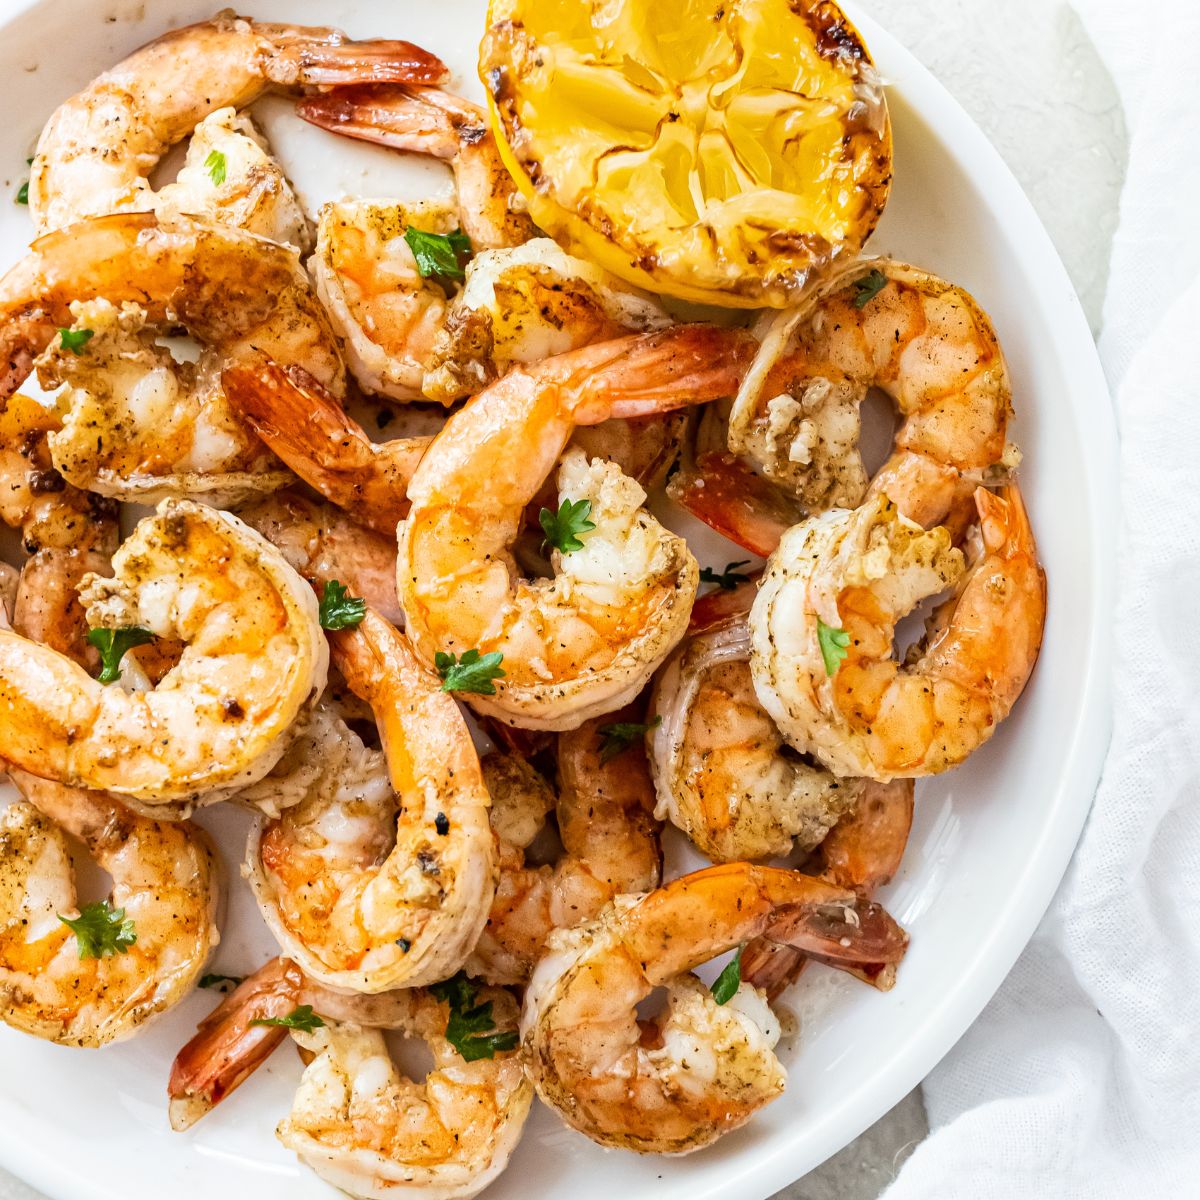 grilled shrimp topped with parsley on a white plate with a lemon half